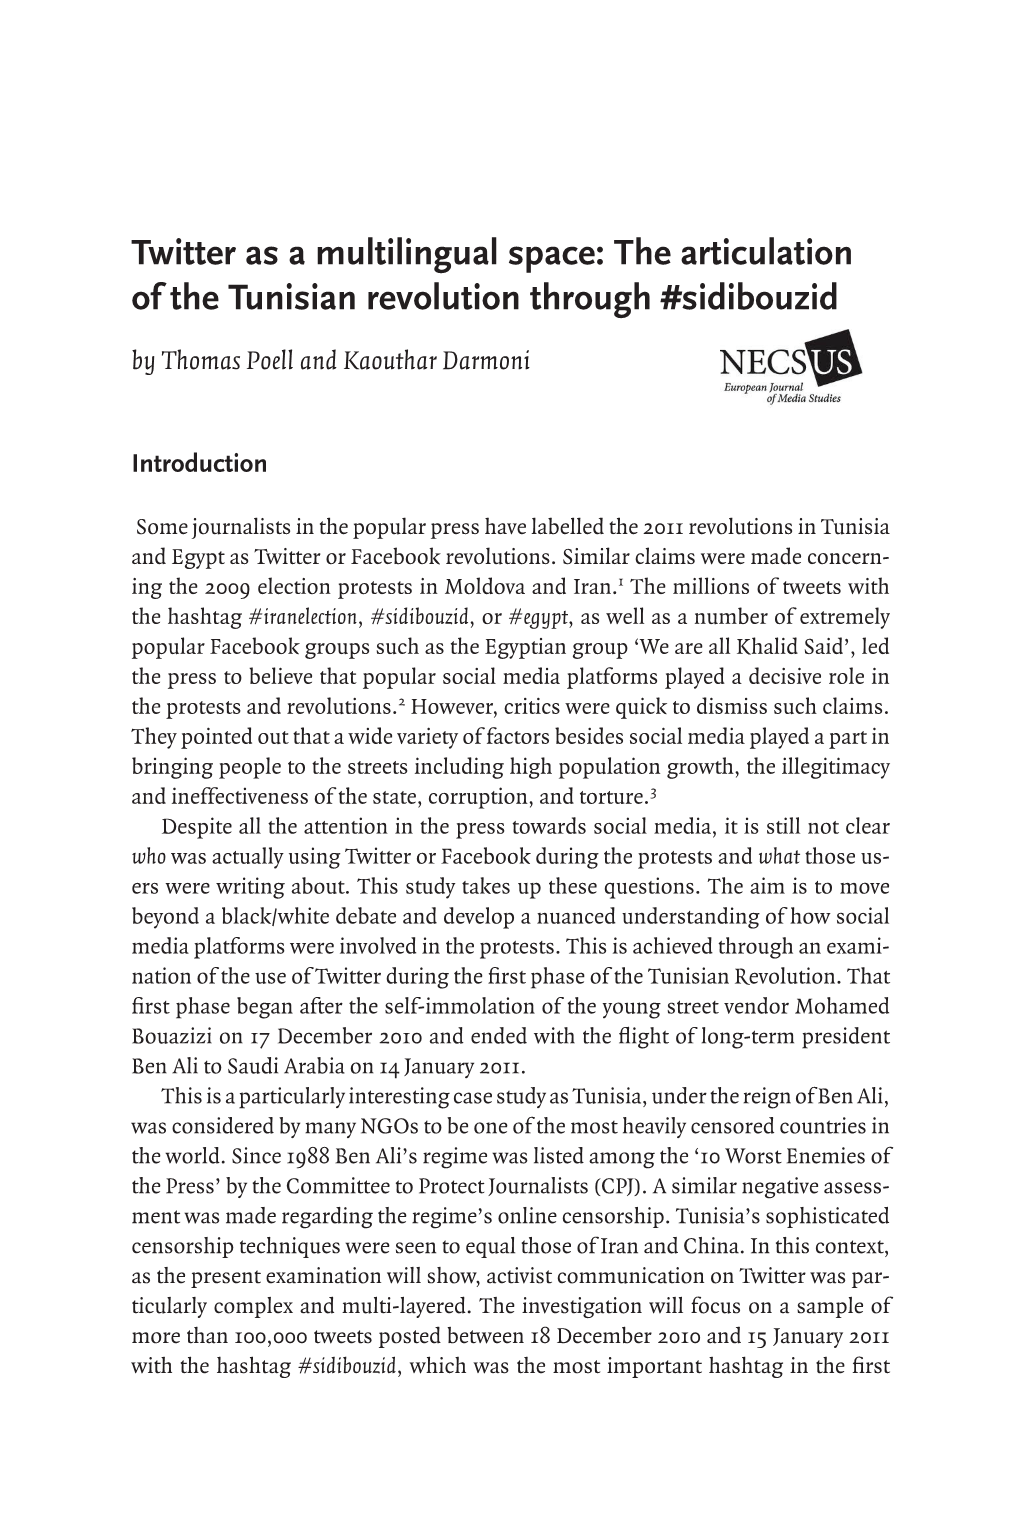 Twitter As a Multilingual Space: the Articulation of the Tunisian Revolution Through #Sidibouzid by Thomas Poell and Kaouthar Darmoni